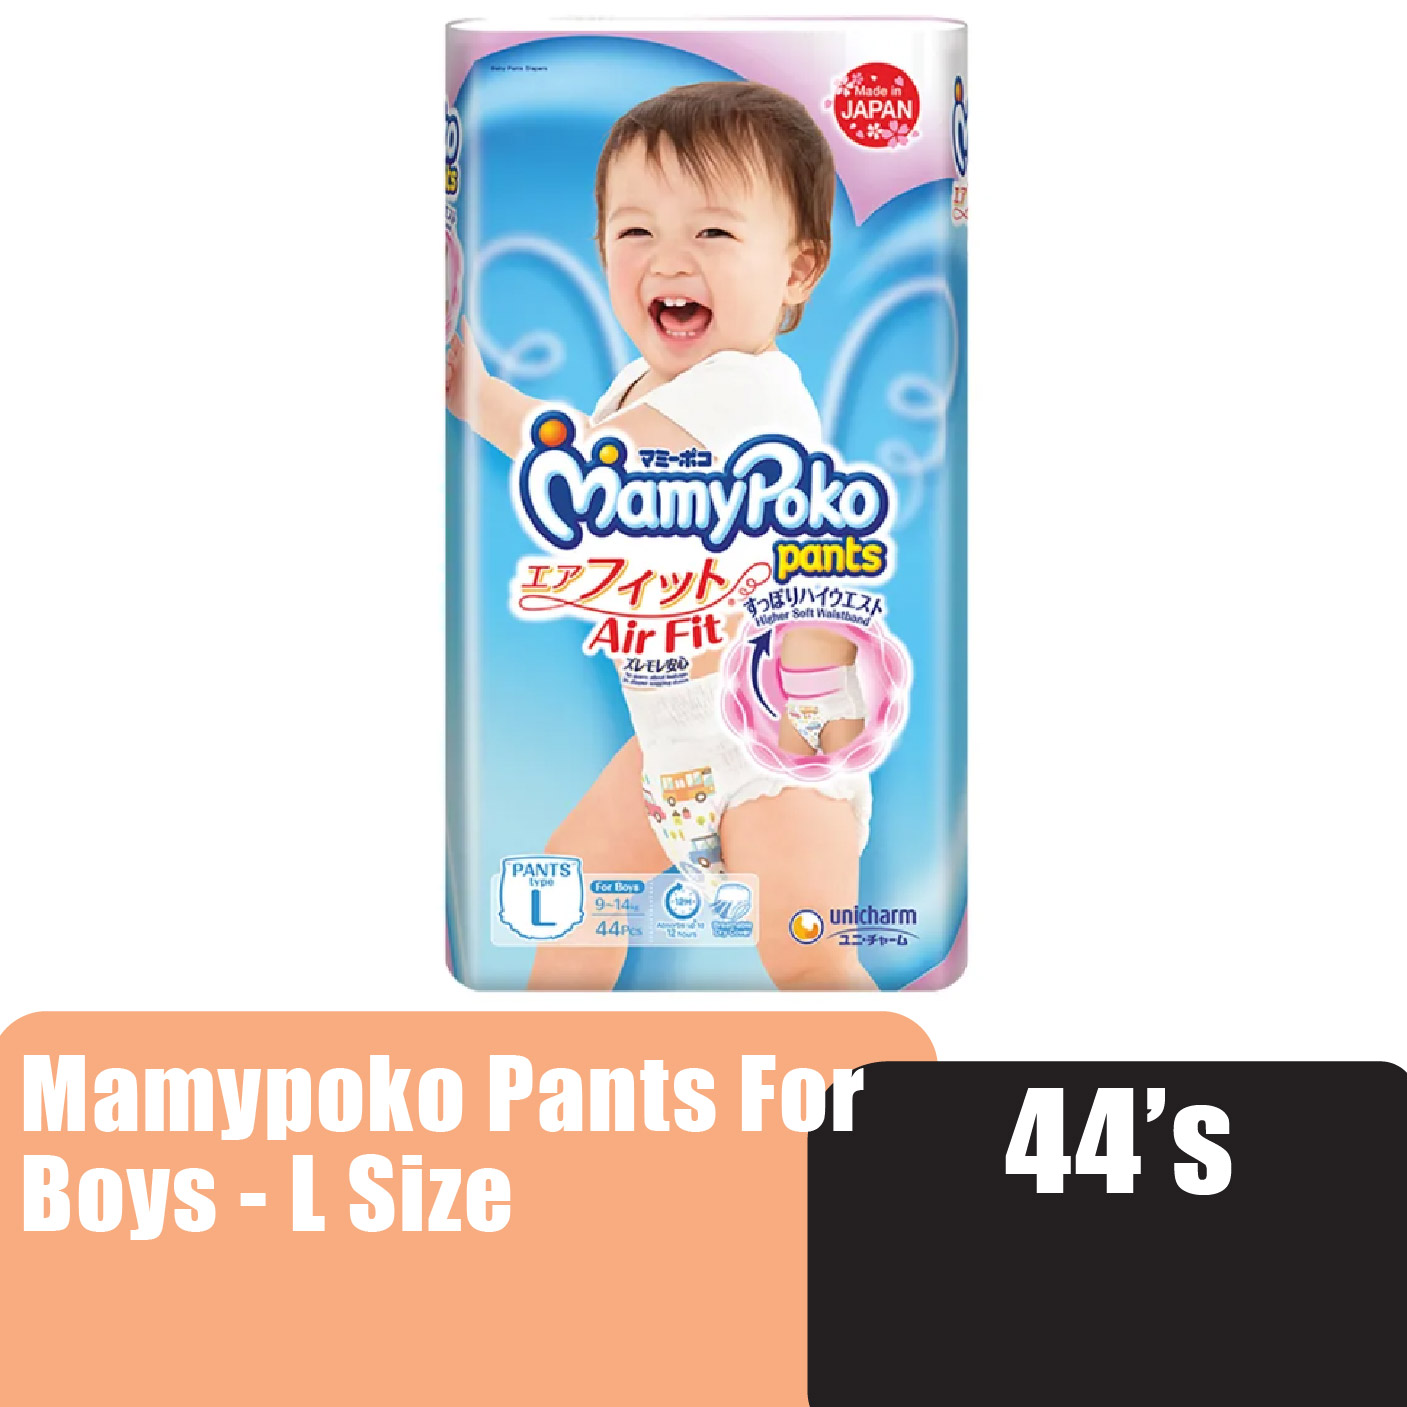 Mamypoko Air Fit Pampers Pant for baby boys 44's - L size/ Premium quality Pempes baby made in Japan